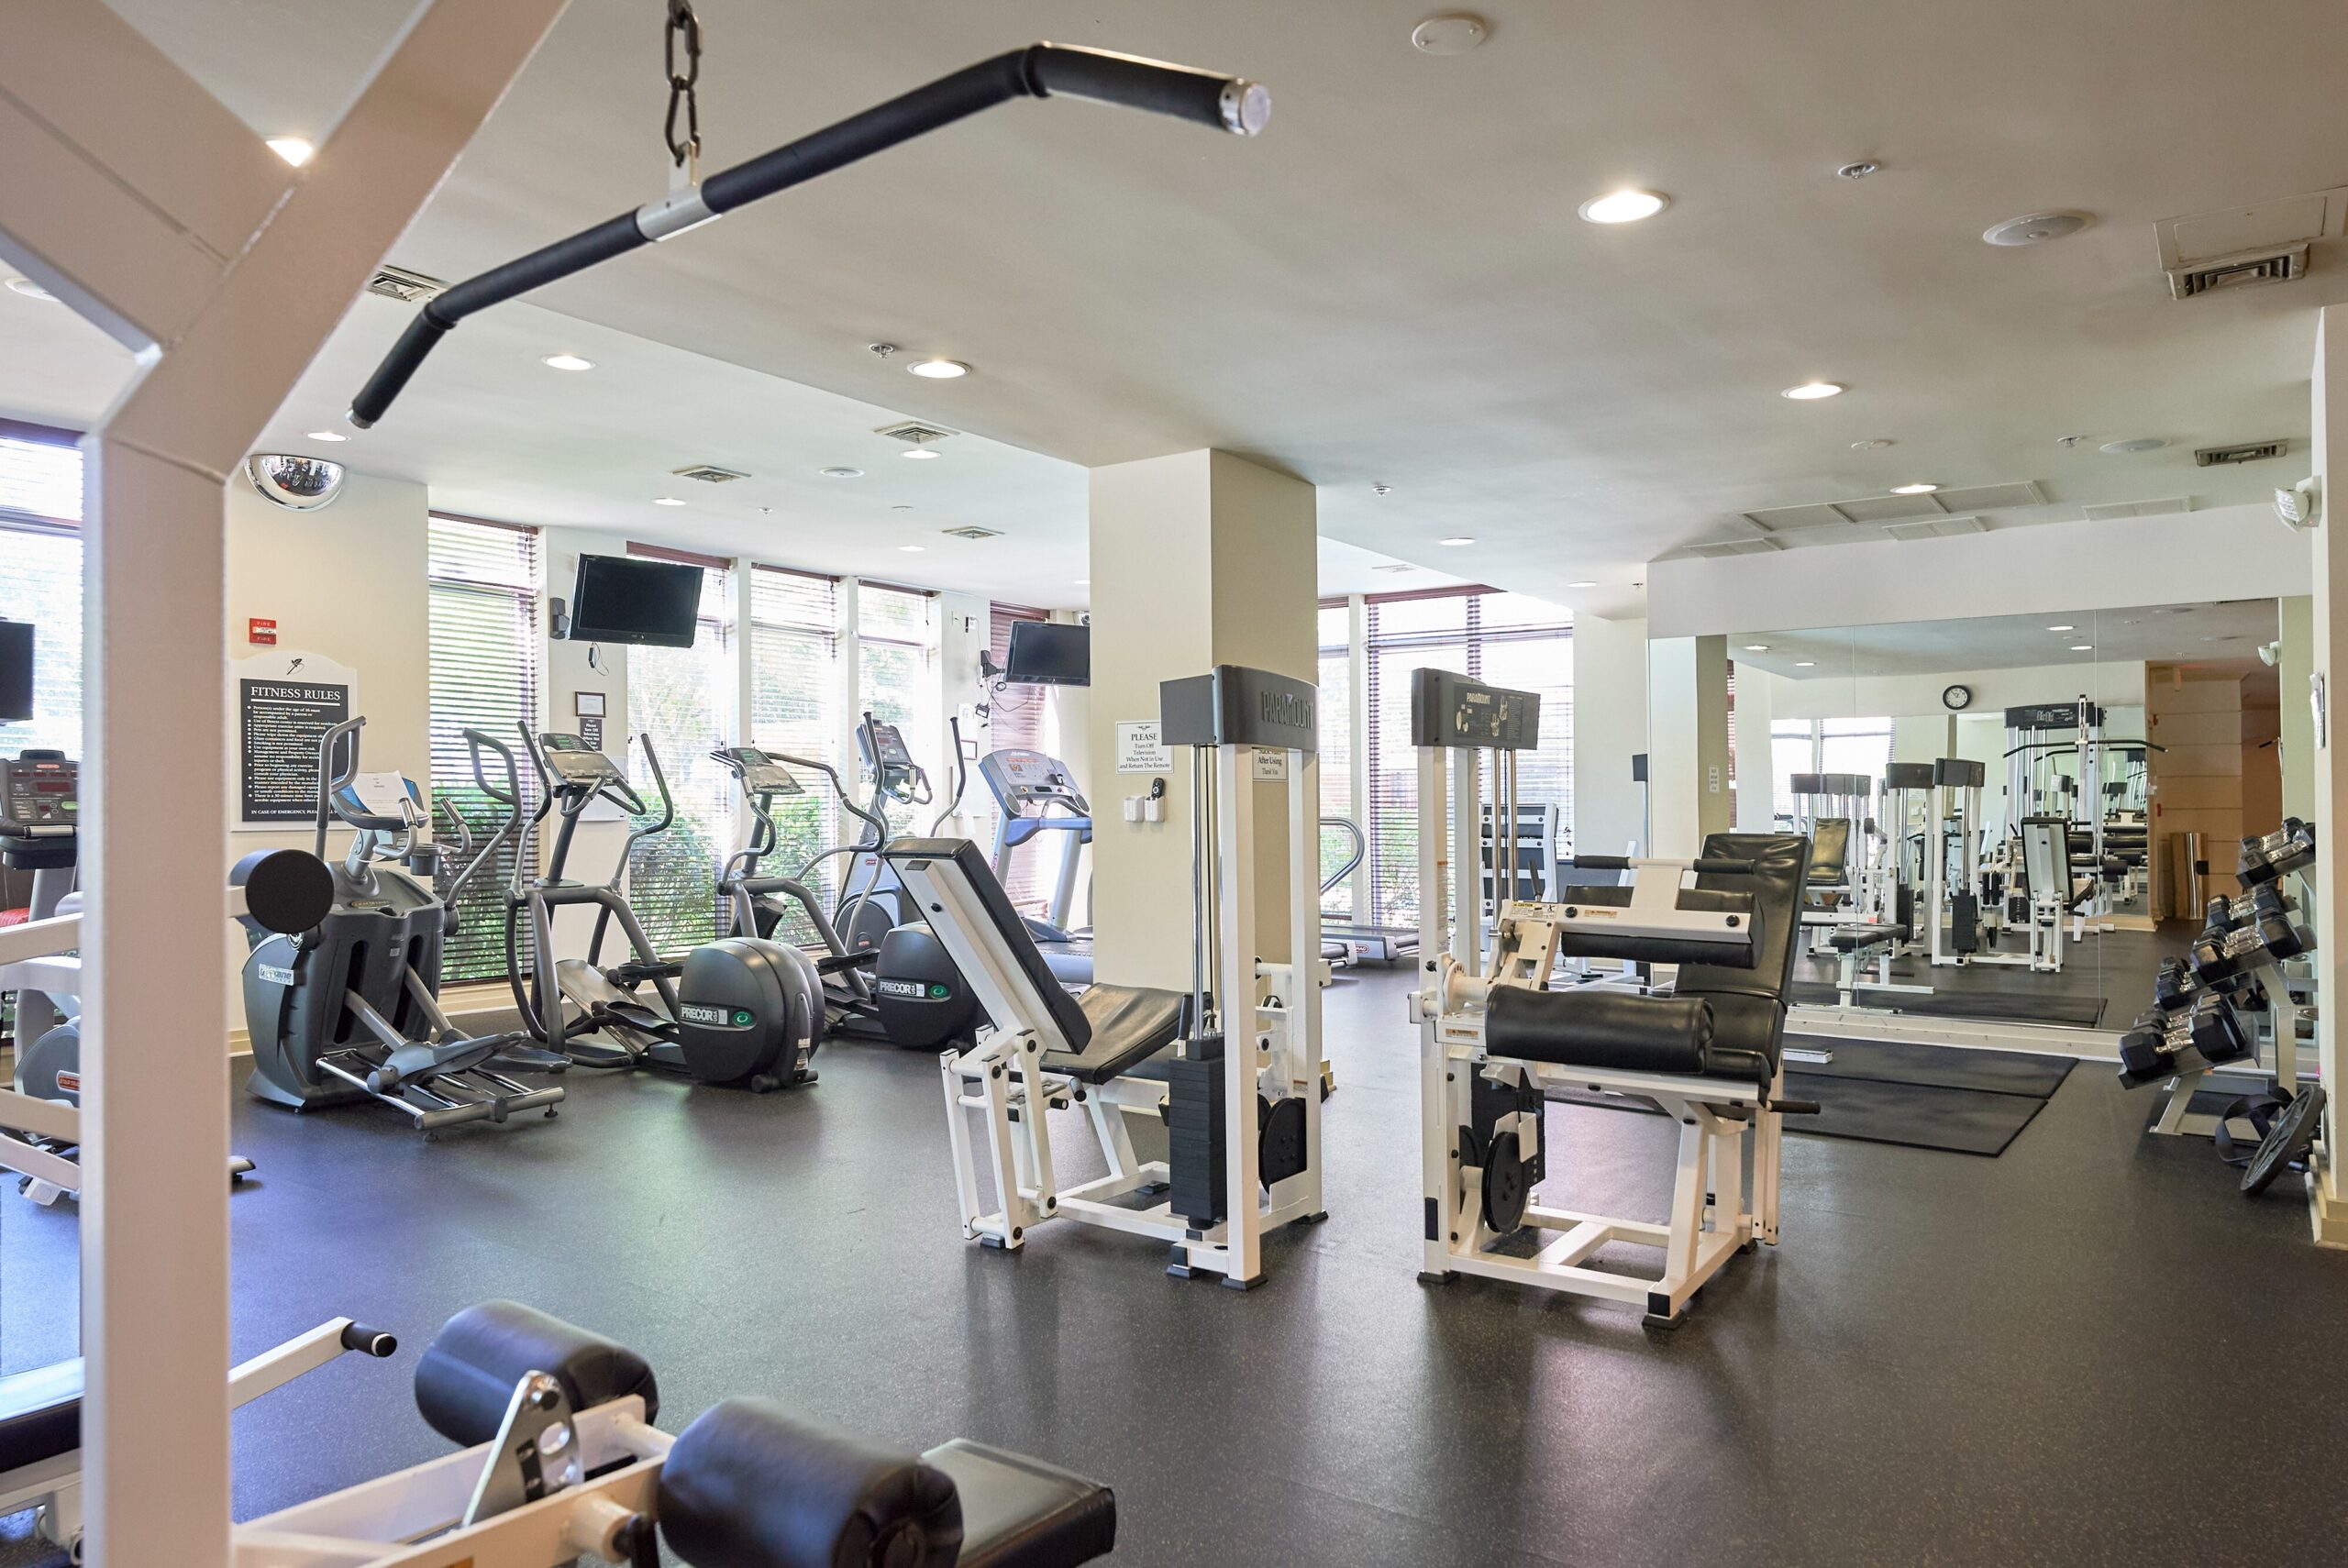 Medium sized fitness center with mirrors and large variety of gym equipment